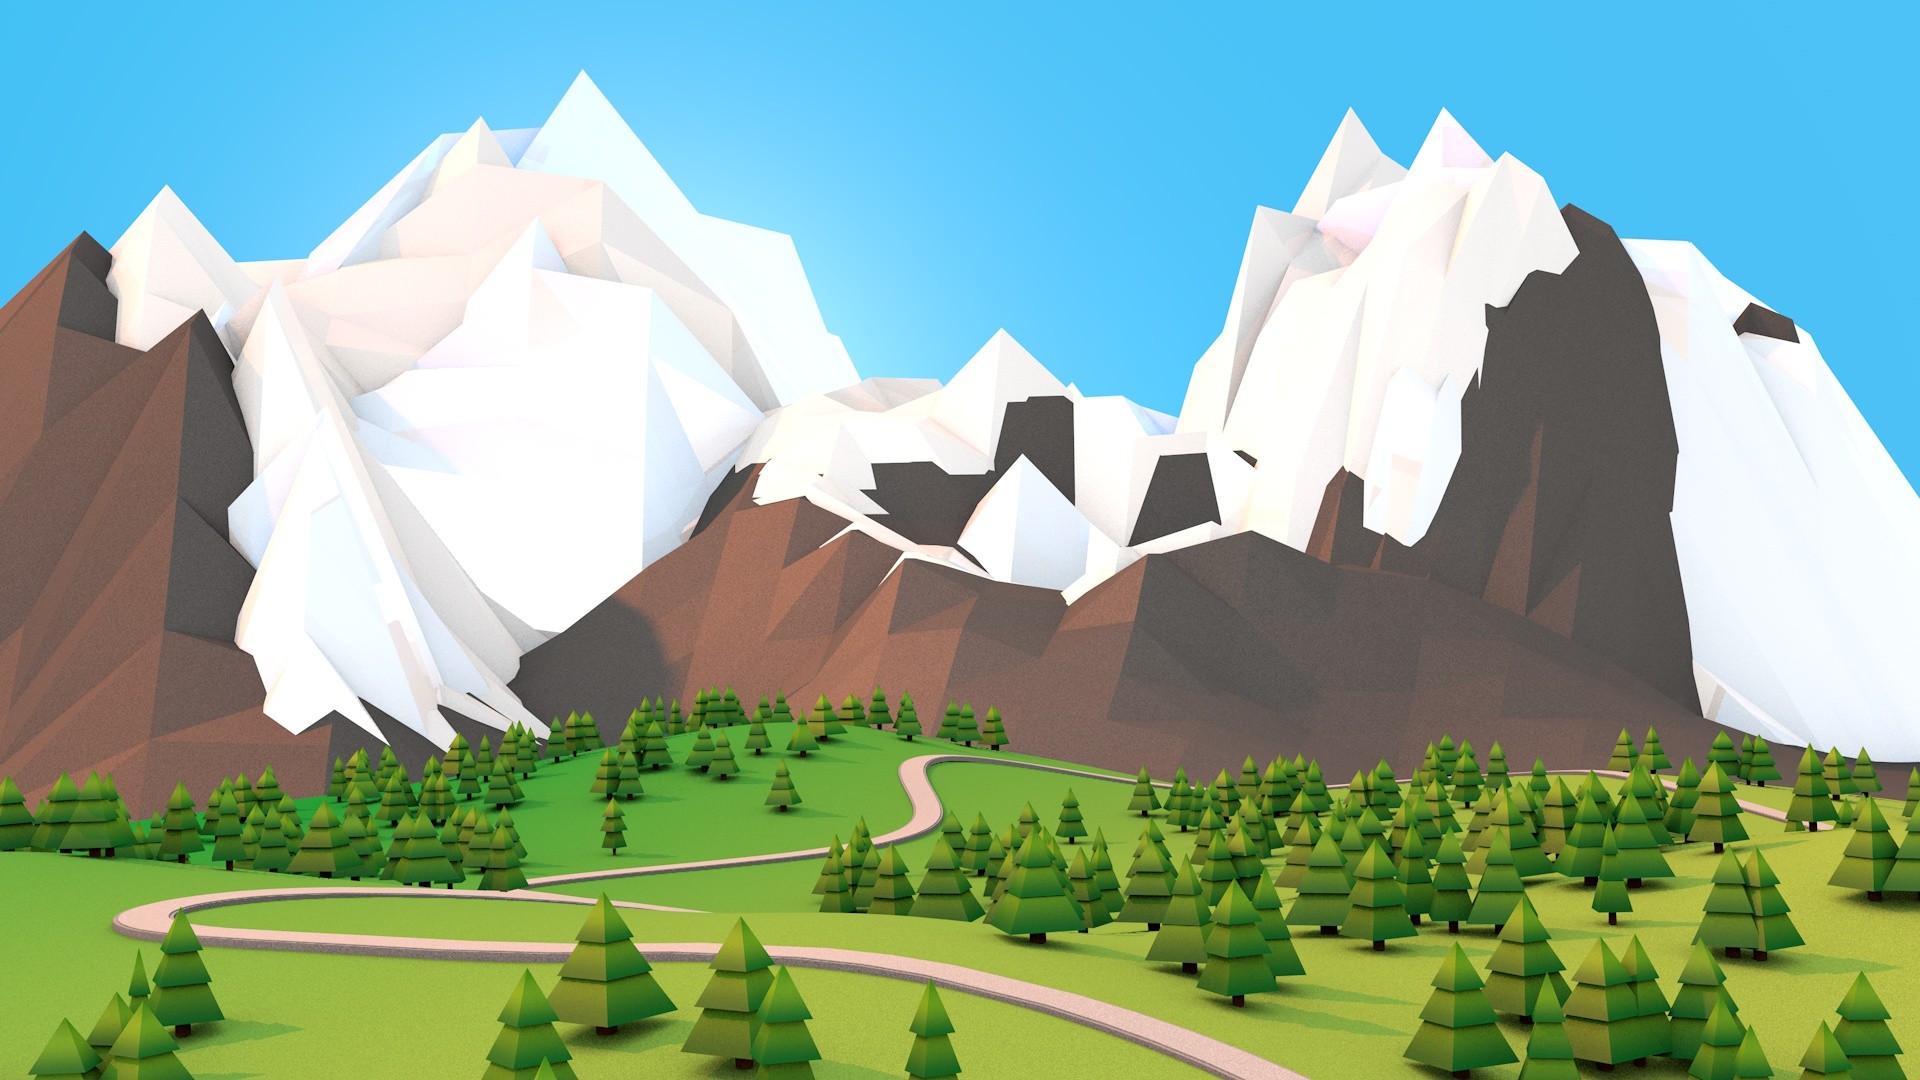 artwork, Mountains, Forest, Snow, Low poly Wallpaper